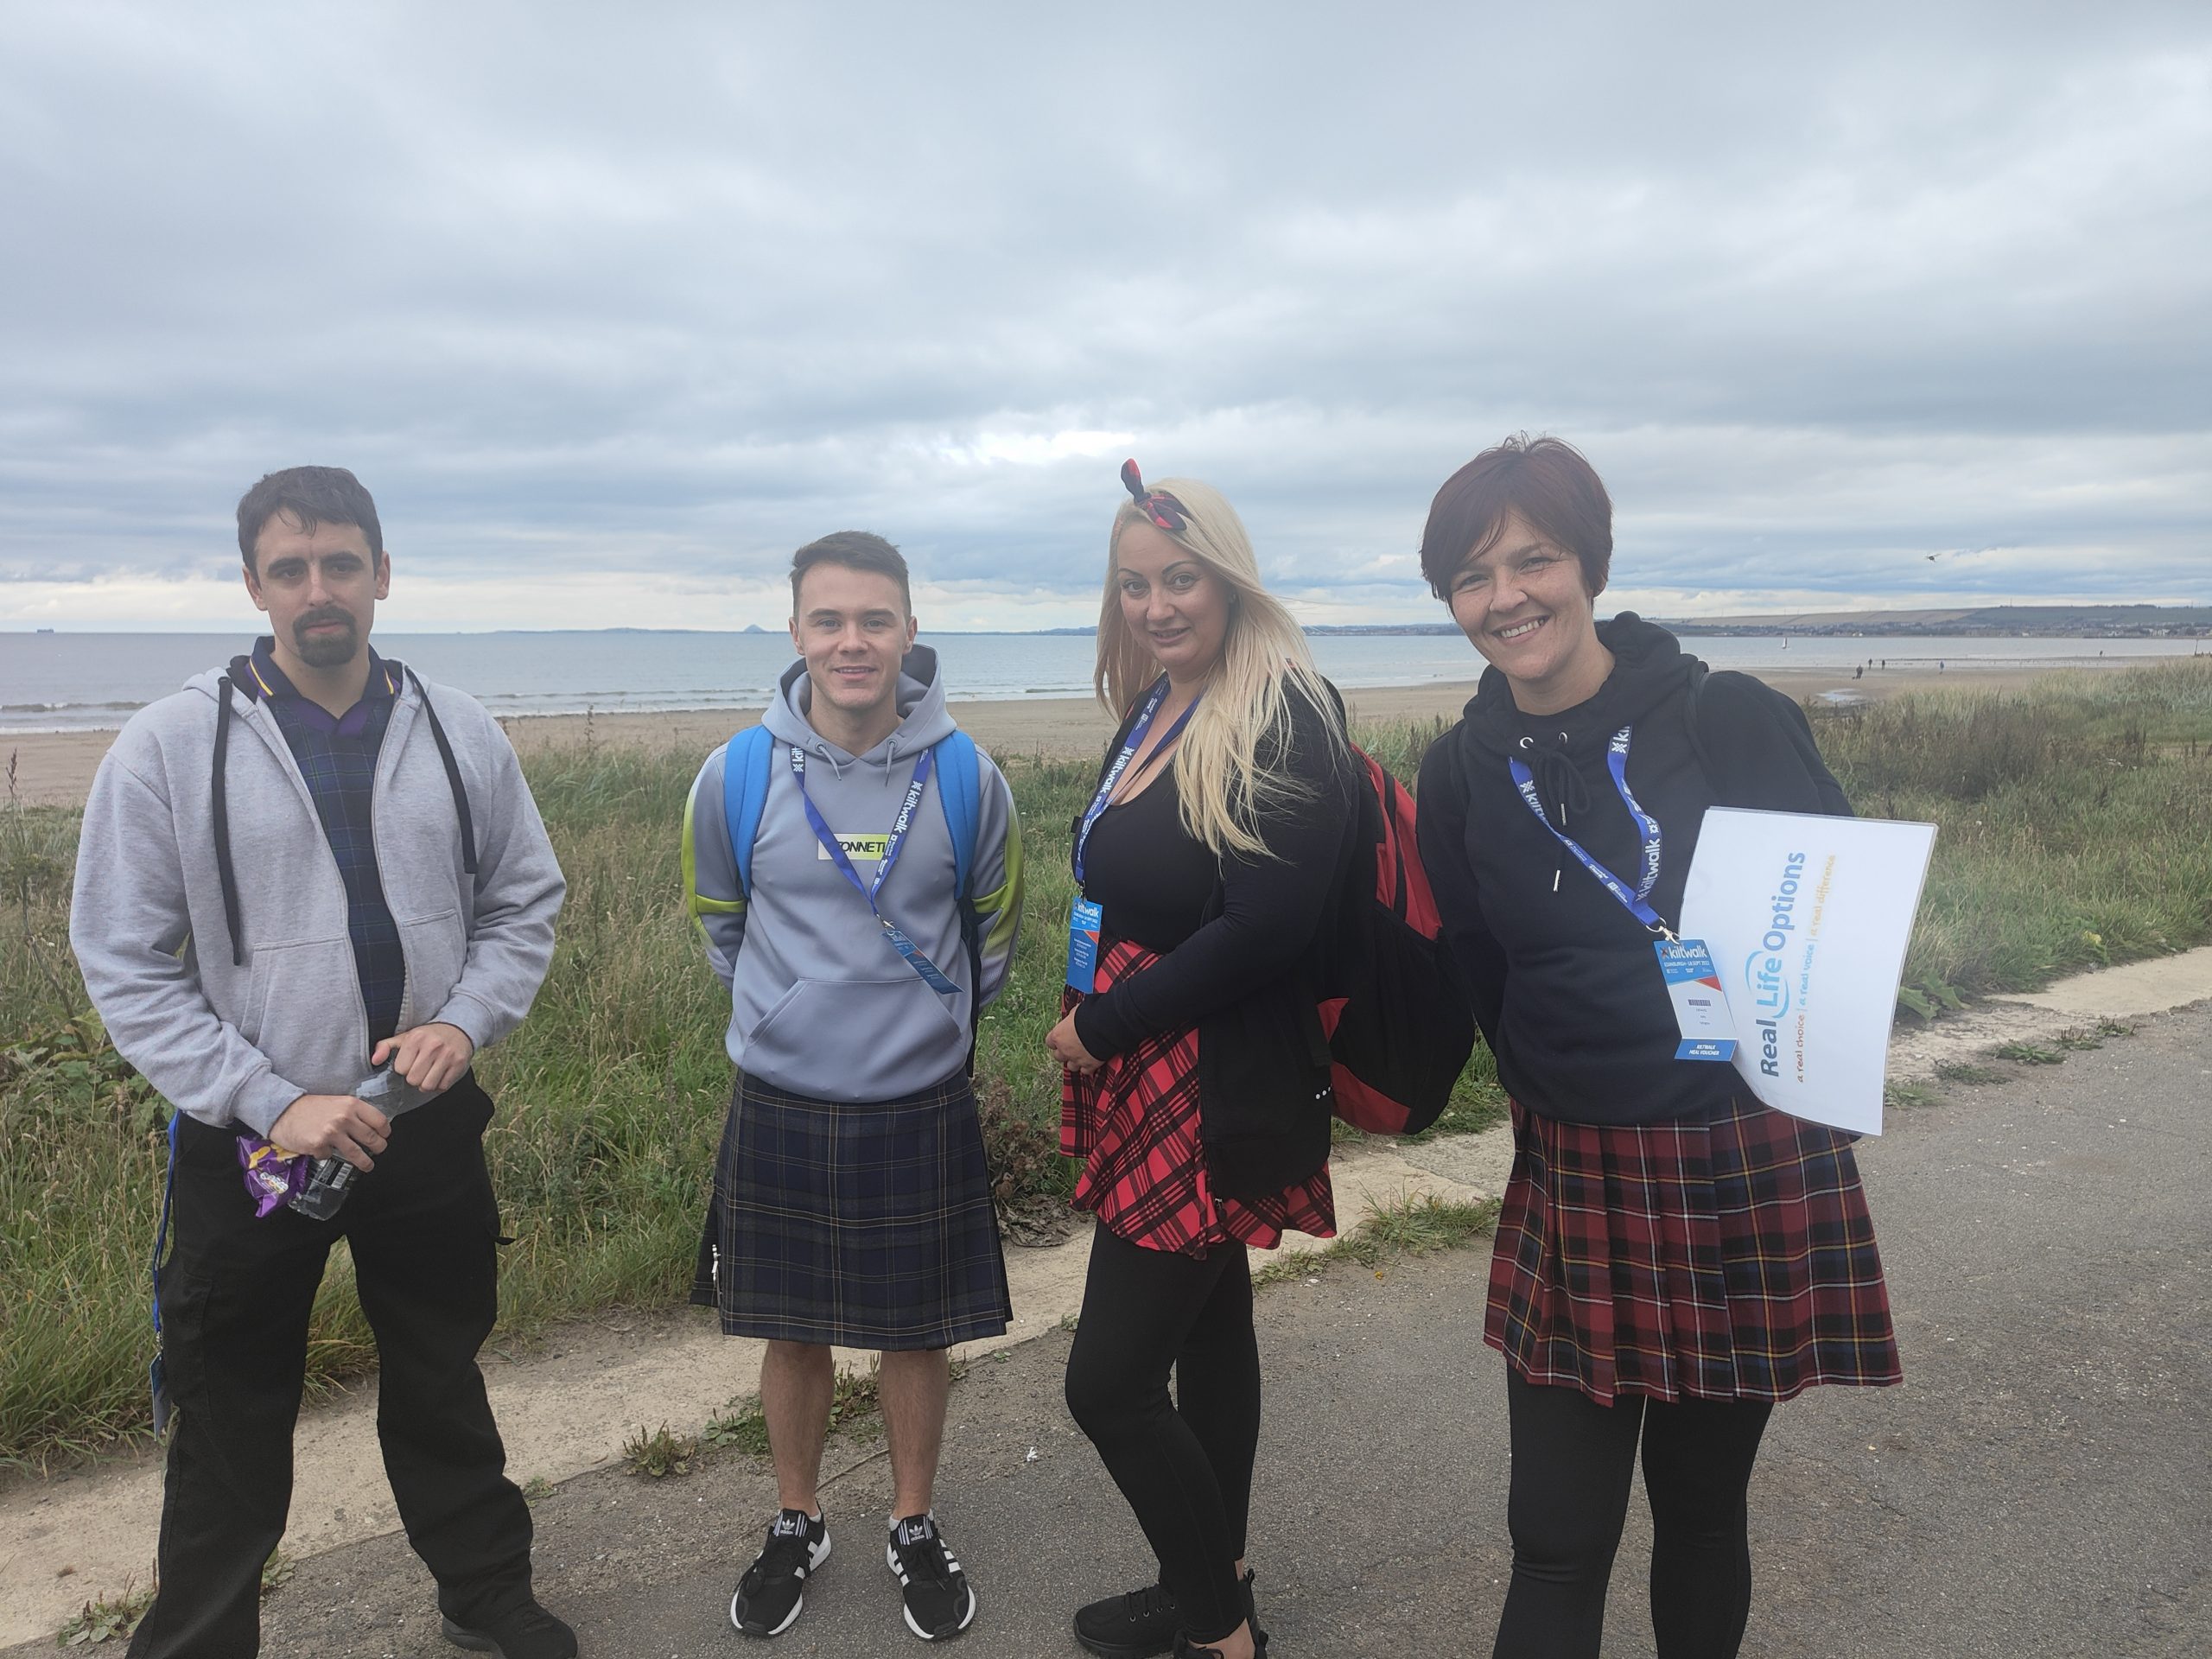 Falkirk Kiltwalk to raise funds for Real Life Options